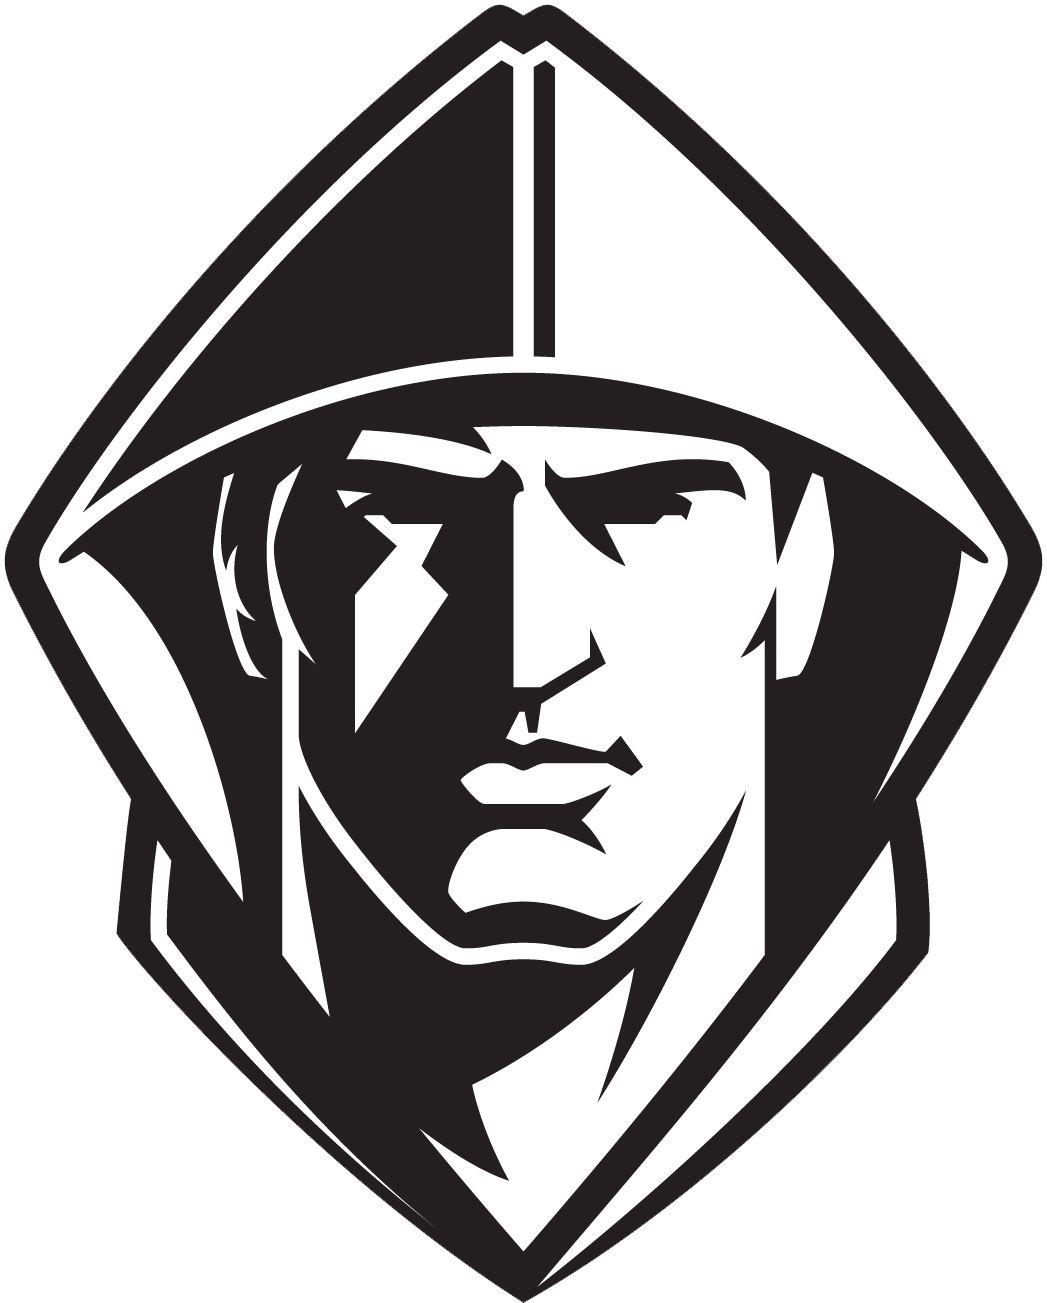 Friars Logo - About BL - Frequently Asked Questions - Bishop Lynch High School